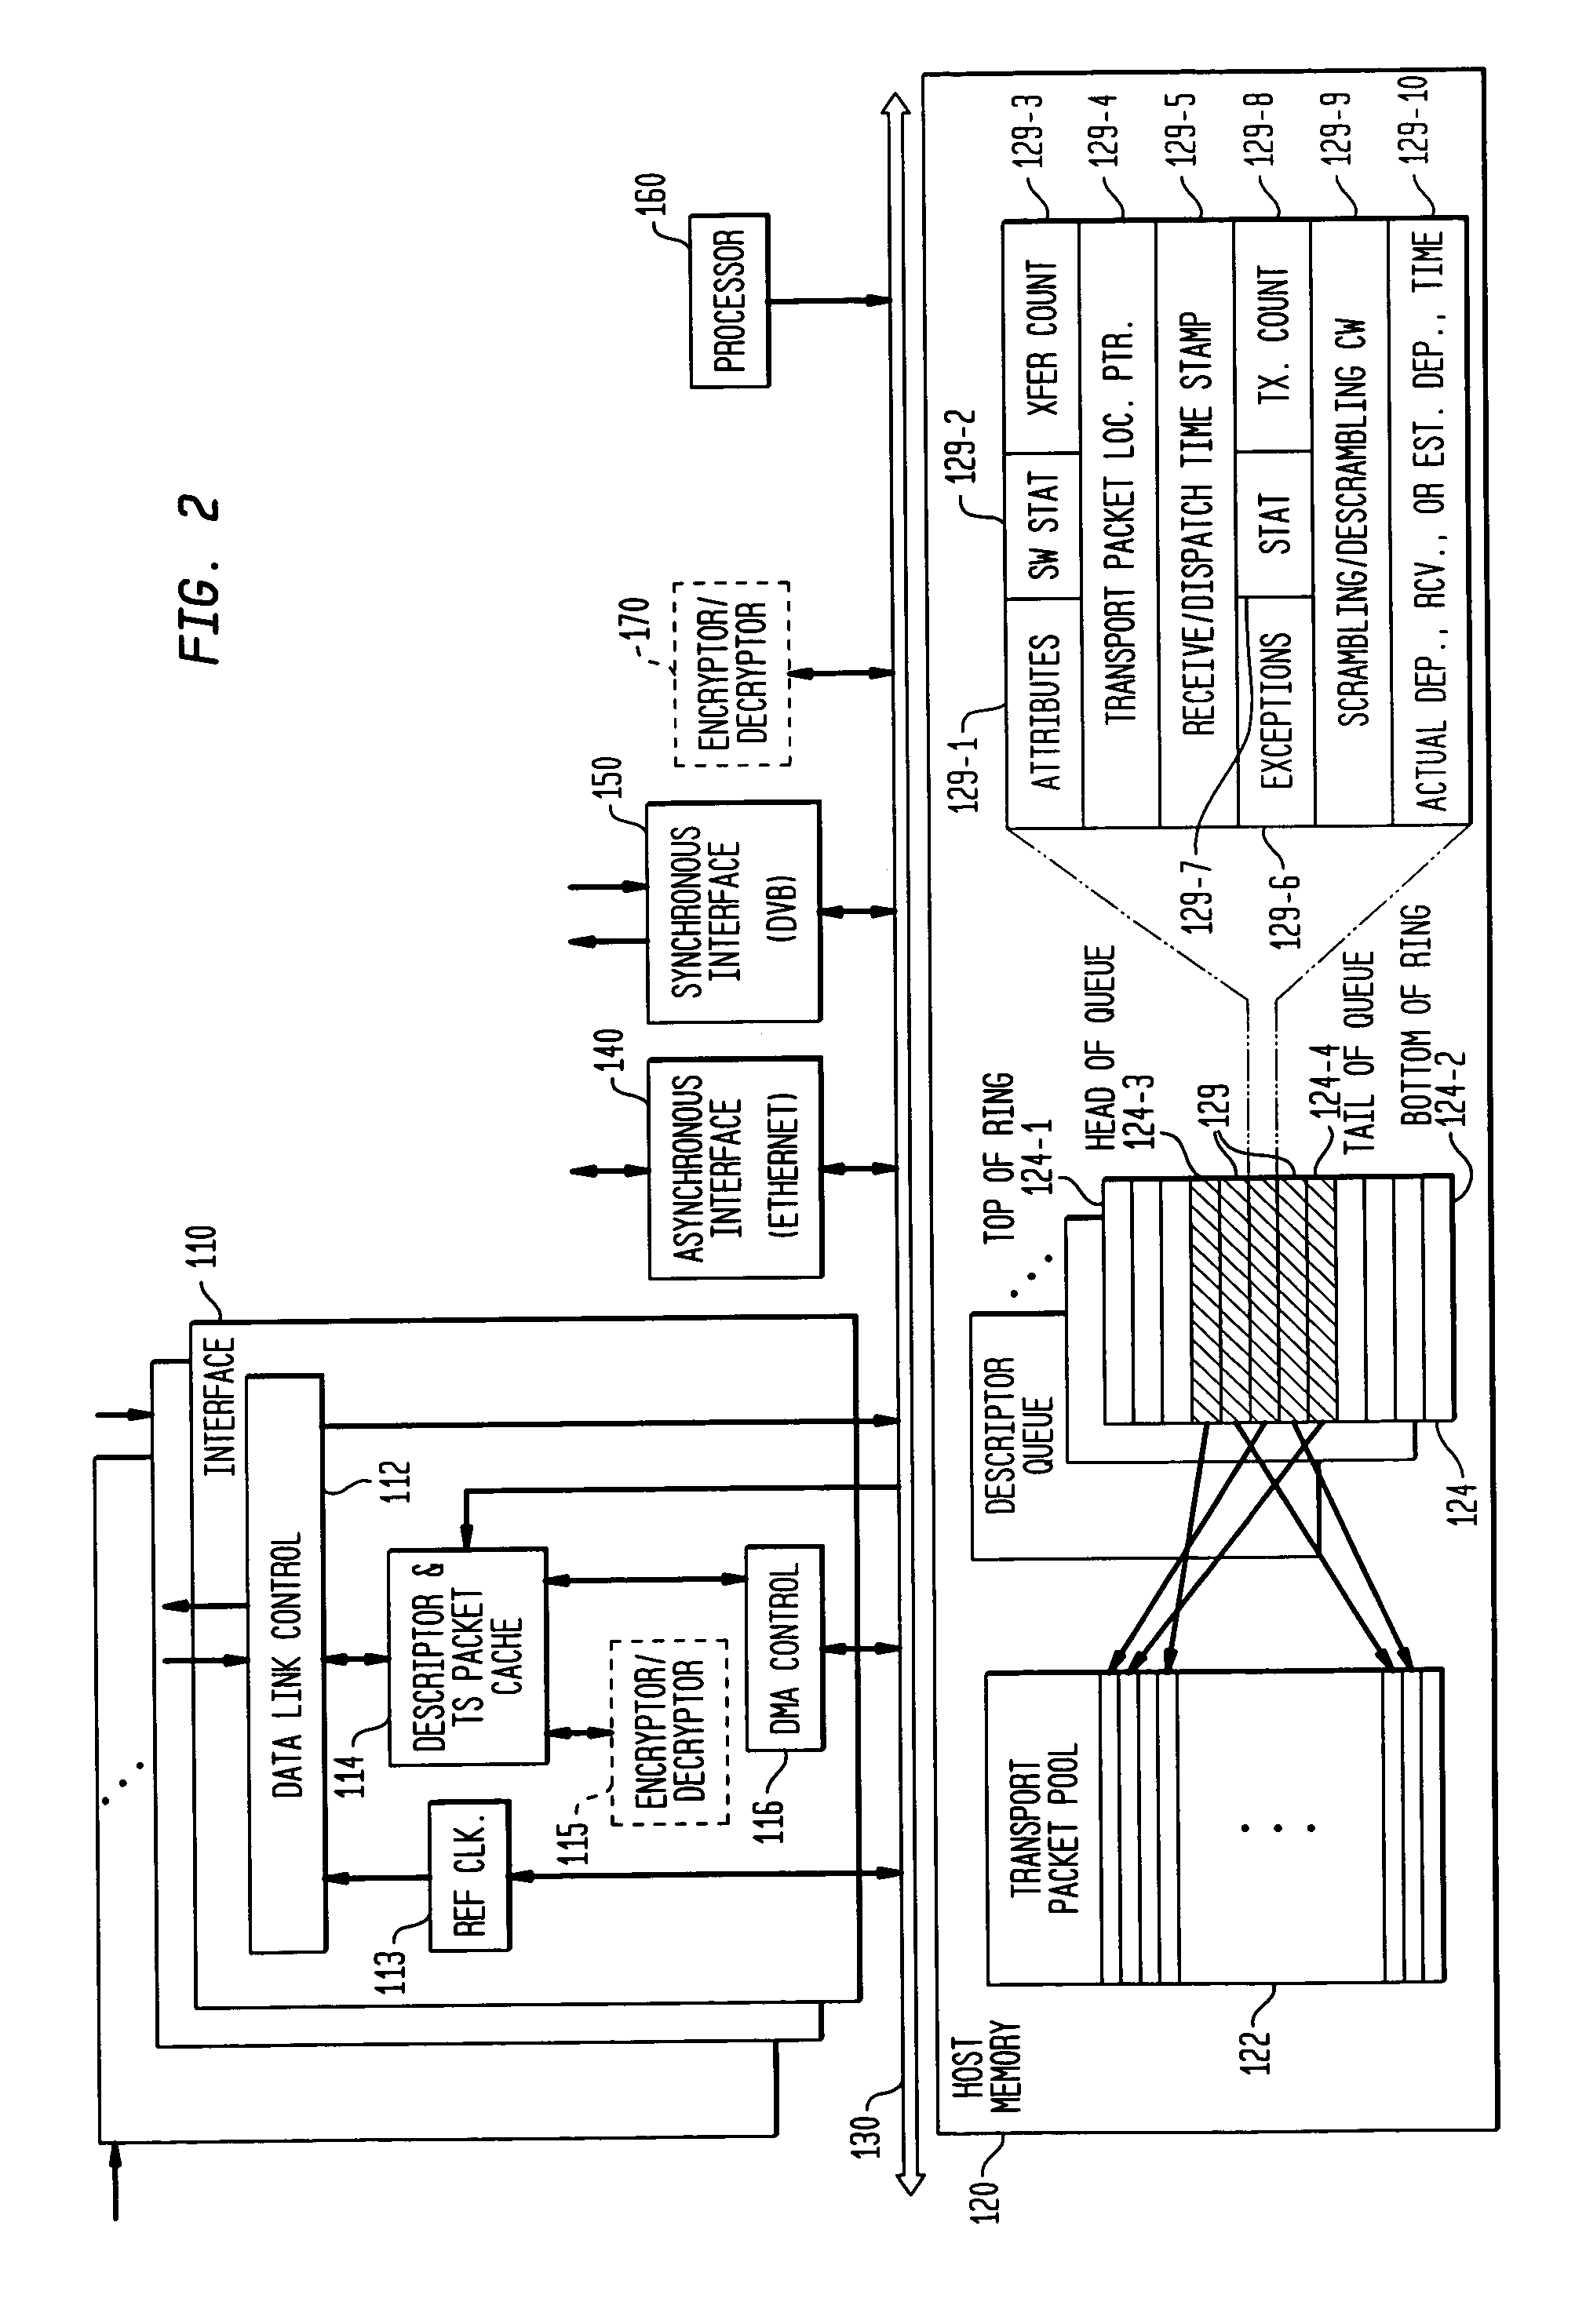 Apparatus for redundant multiplexing and remultiplexing of program streams and best effort data